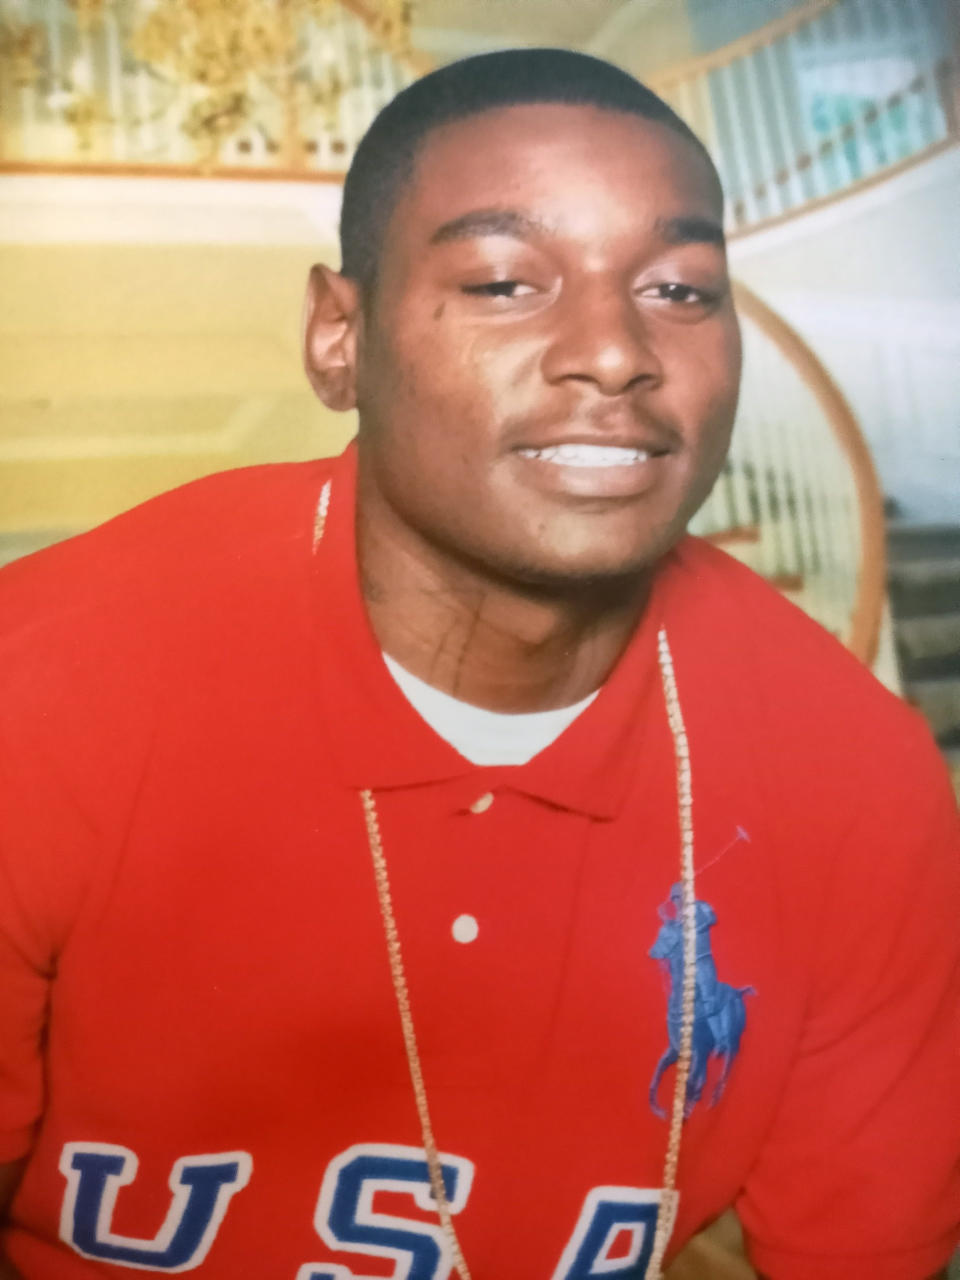 This undated photo provided by the family in August 2021 shows shooting victim Safarian Herring of Chicago. Samona Nicholson, Herring’s mother, said he once studied at Le Cordon Bleu culinary school, and dreamed of starting a food-truck business. Two weeks before being fatally shot in May 2020, he had survived a shooting at a bus stop. Nicholson, who called her son "Pook," arranged for him to stay with a relative where she thought he’d be safe. (Courtesy of Samona Nicholson via AP)